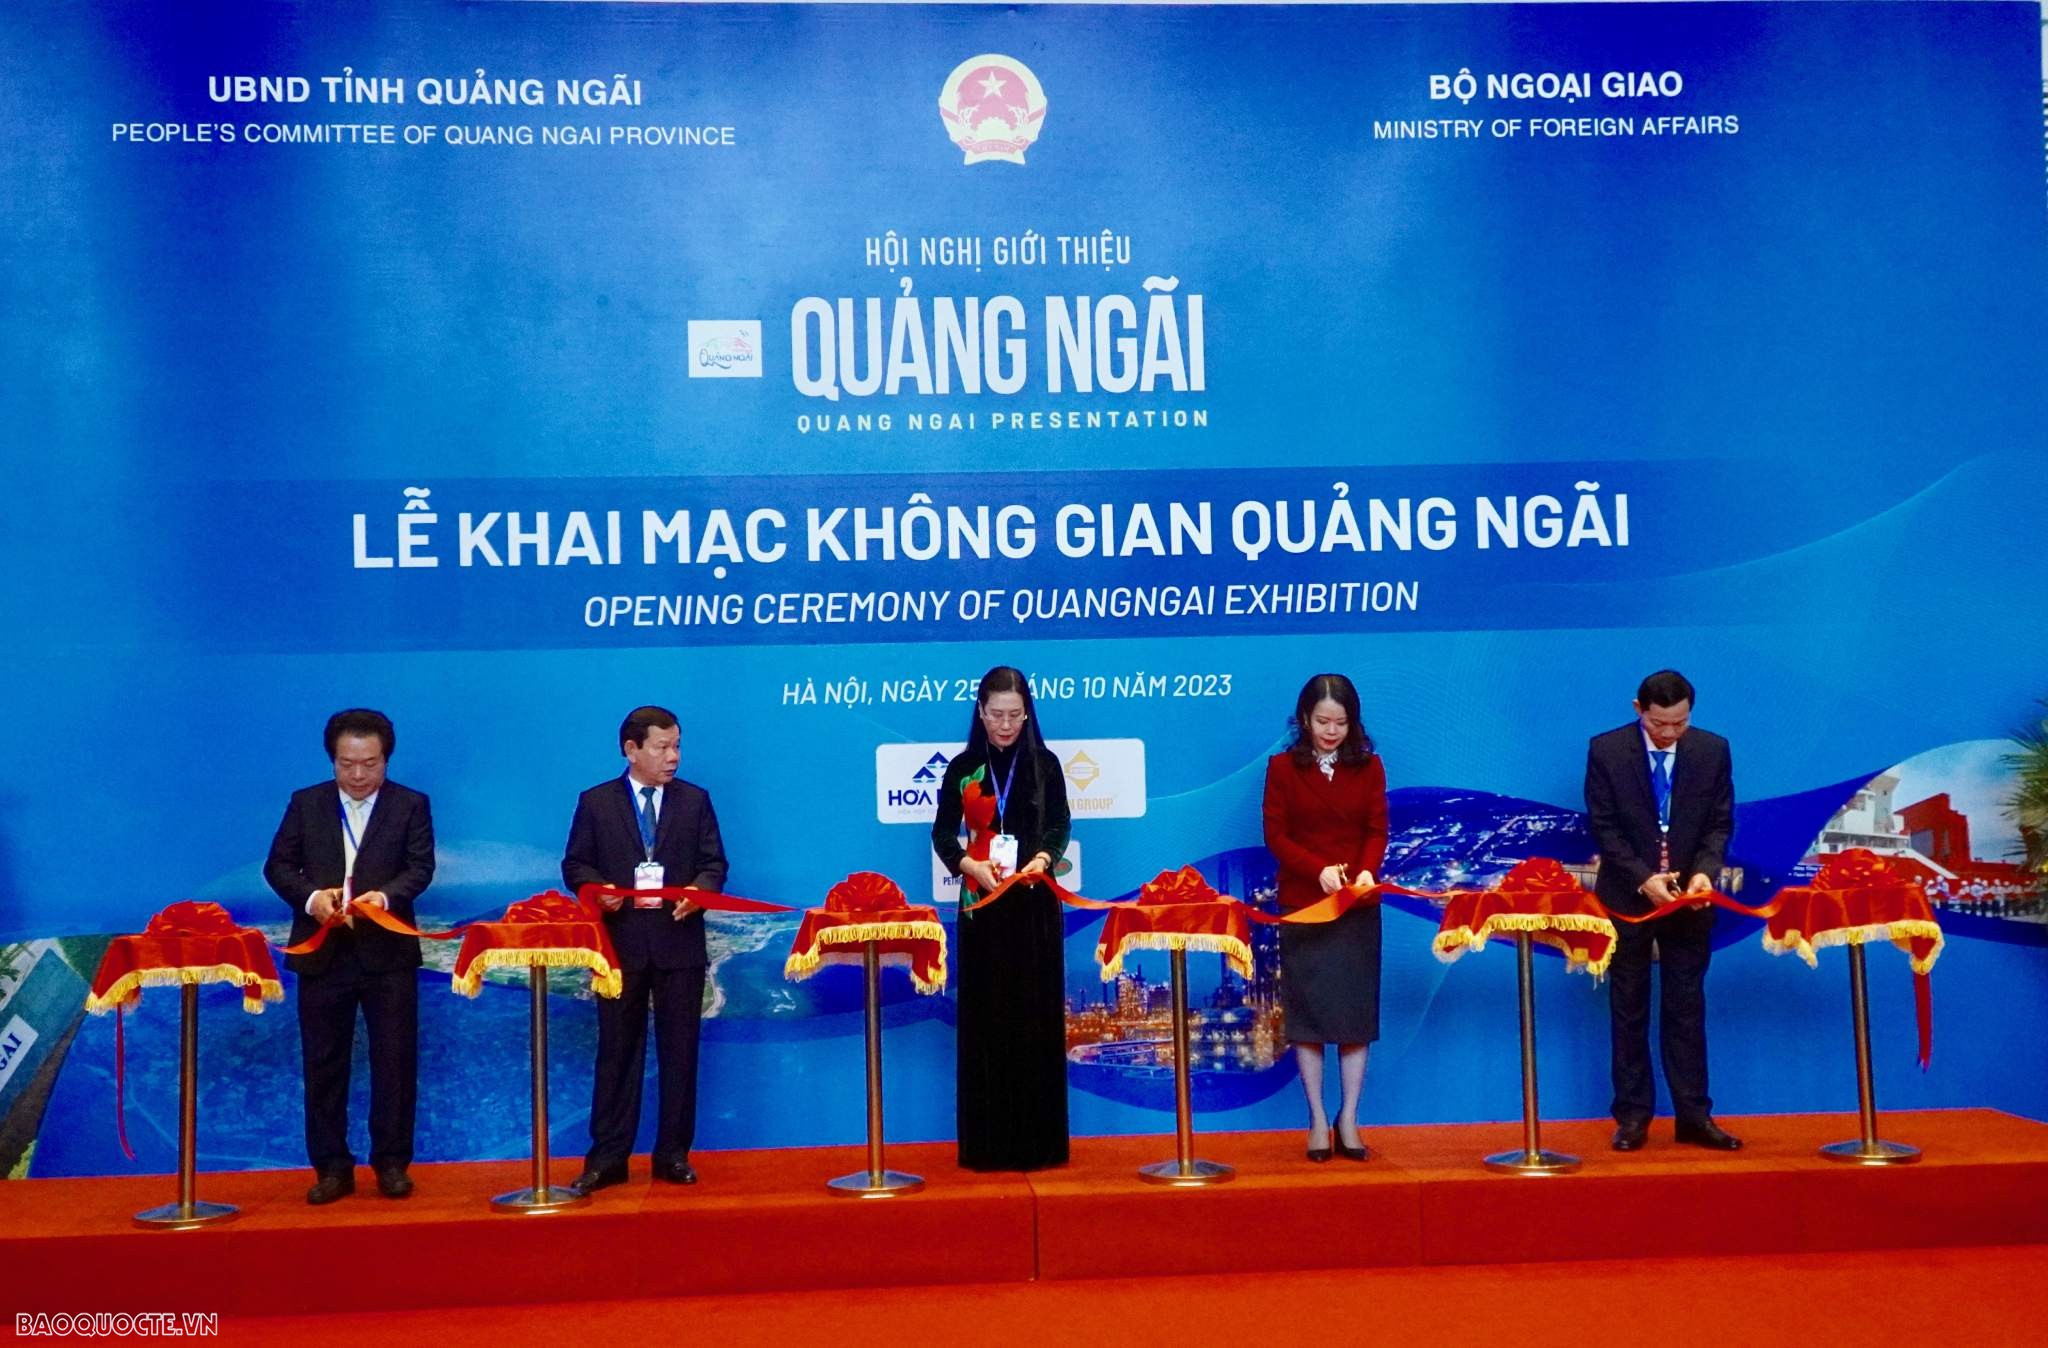 Opening Ceremony of Quang Ngai Exhibition